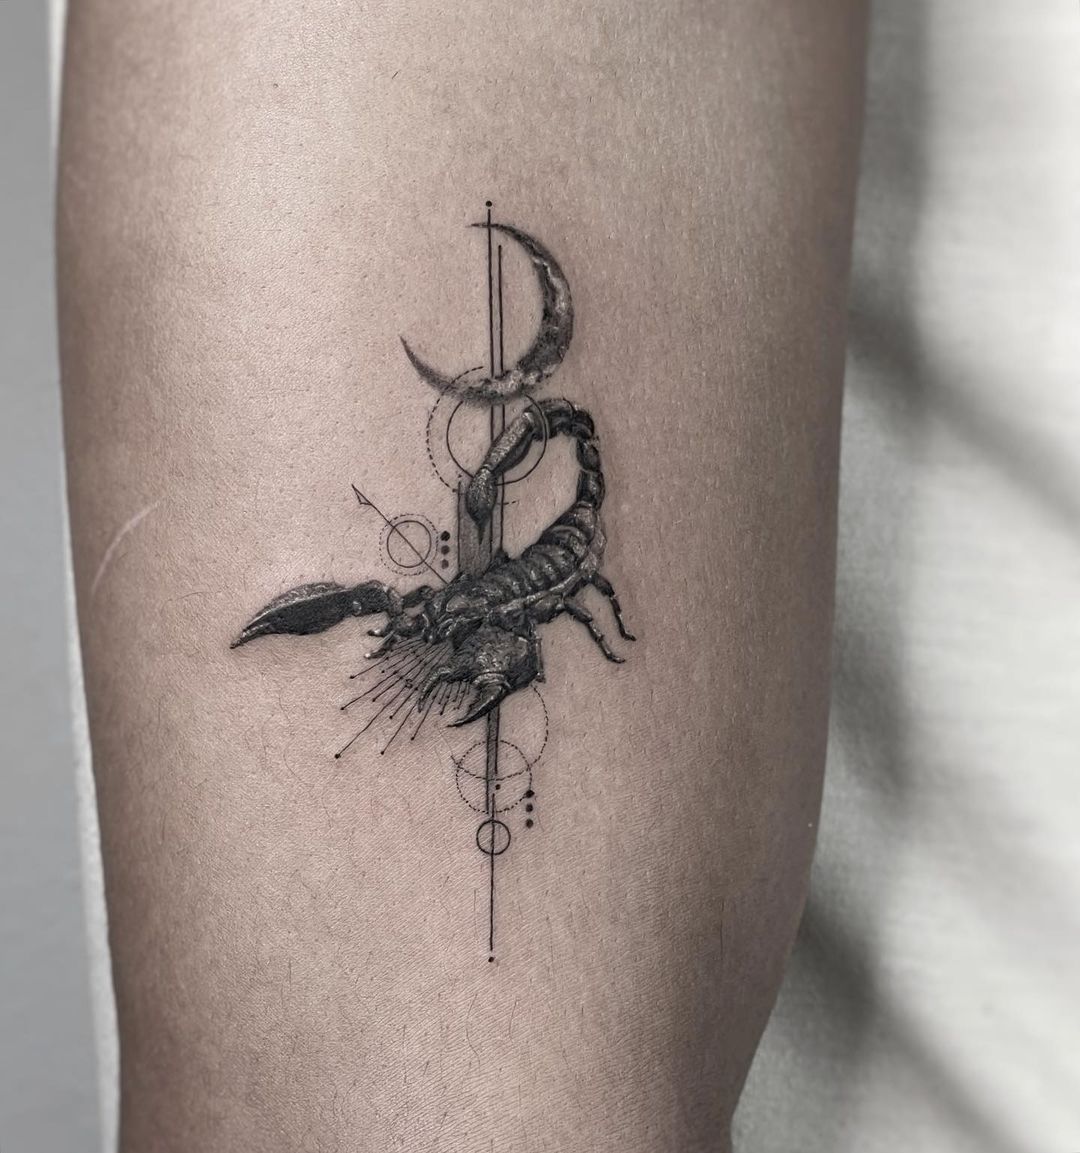 Scorpion Tattoos: The Meaning Behind This Popular Design